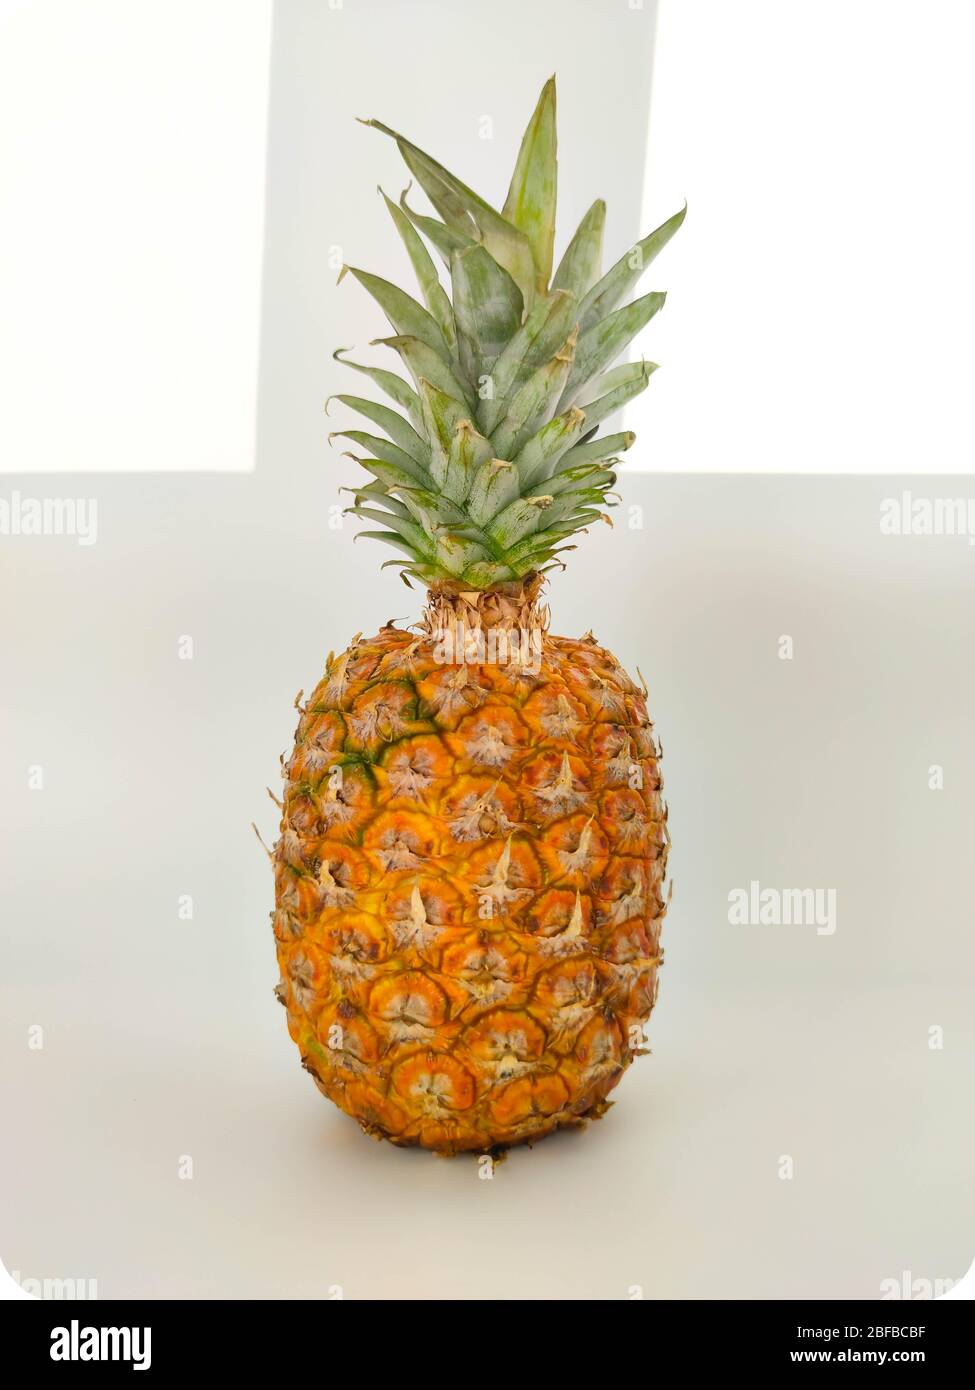 A whole pineapple on white. Vegetarian and healthy food. Nutrition and diet background Stock photo Stock Photo